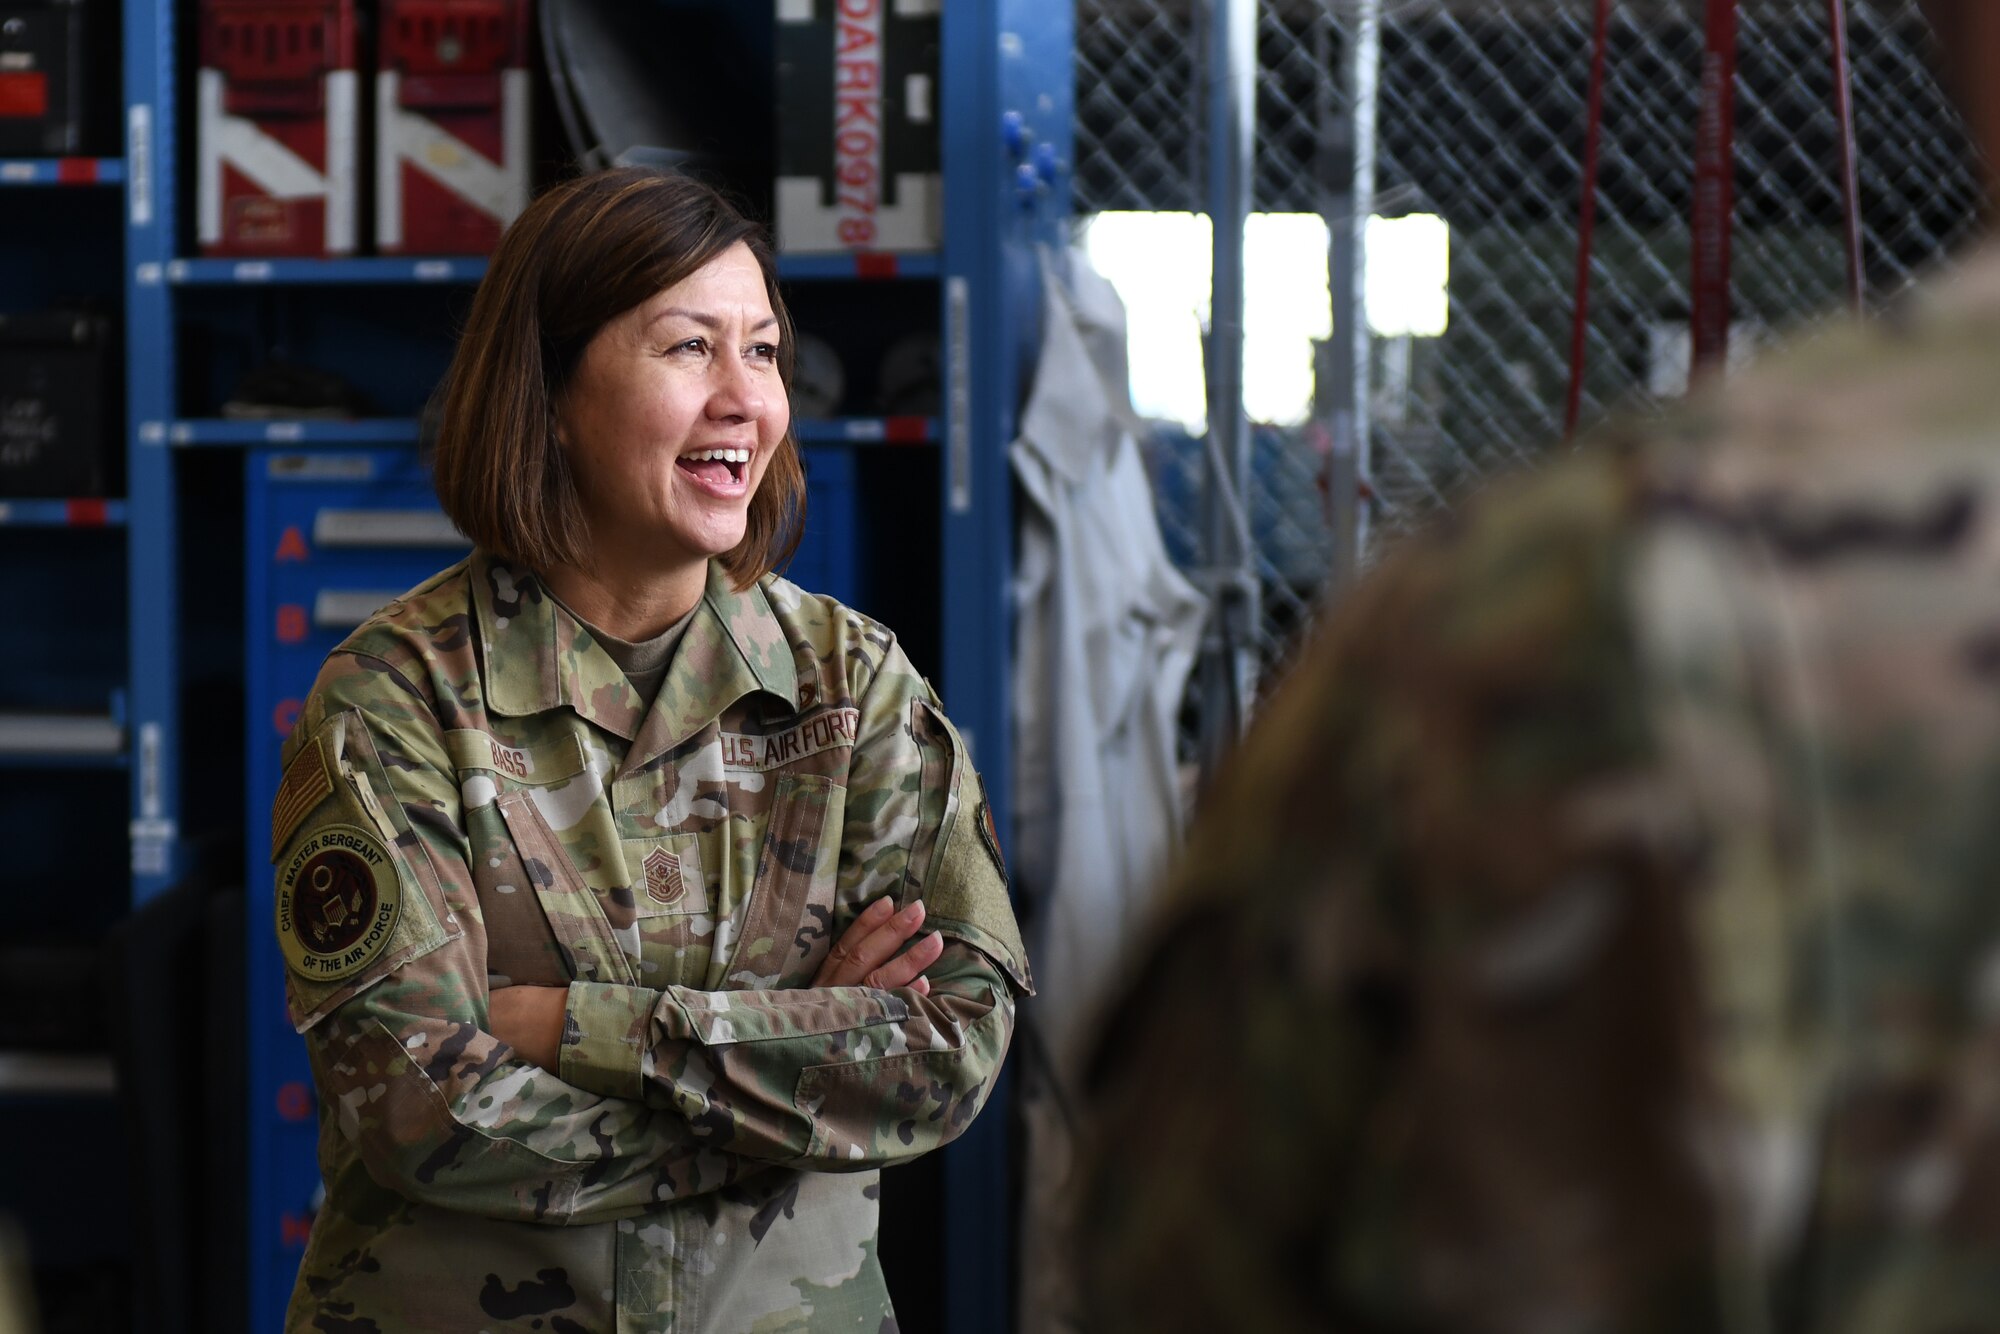 Chief Master Sergeant of the Air Force JoAnne S. Bass laughs